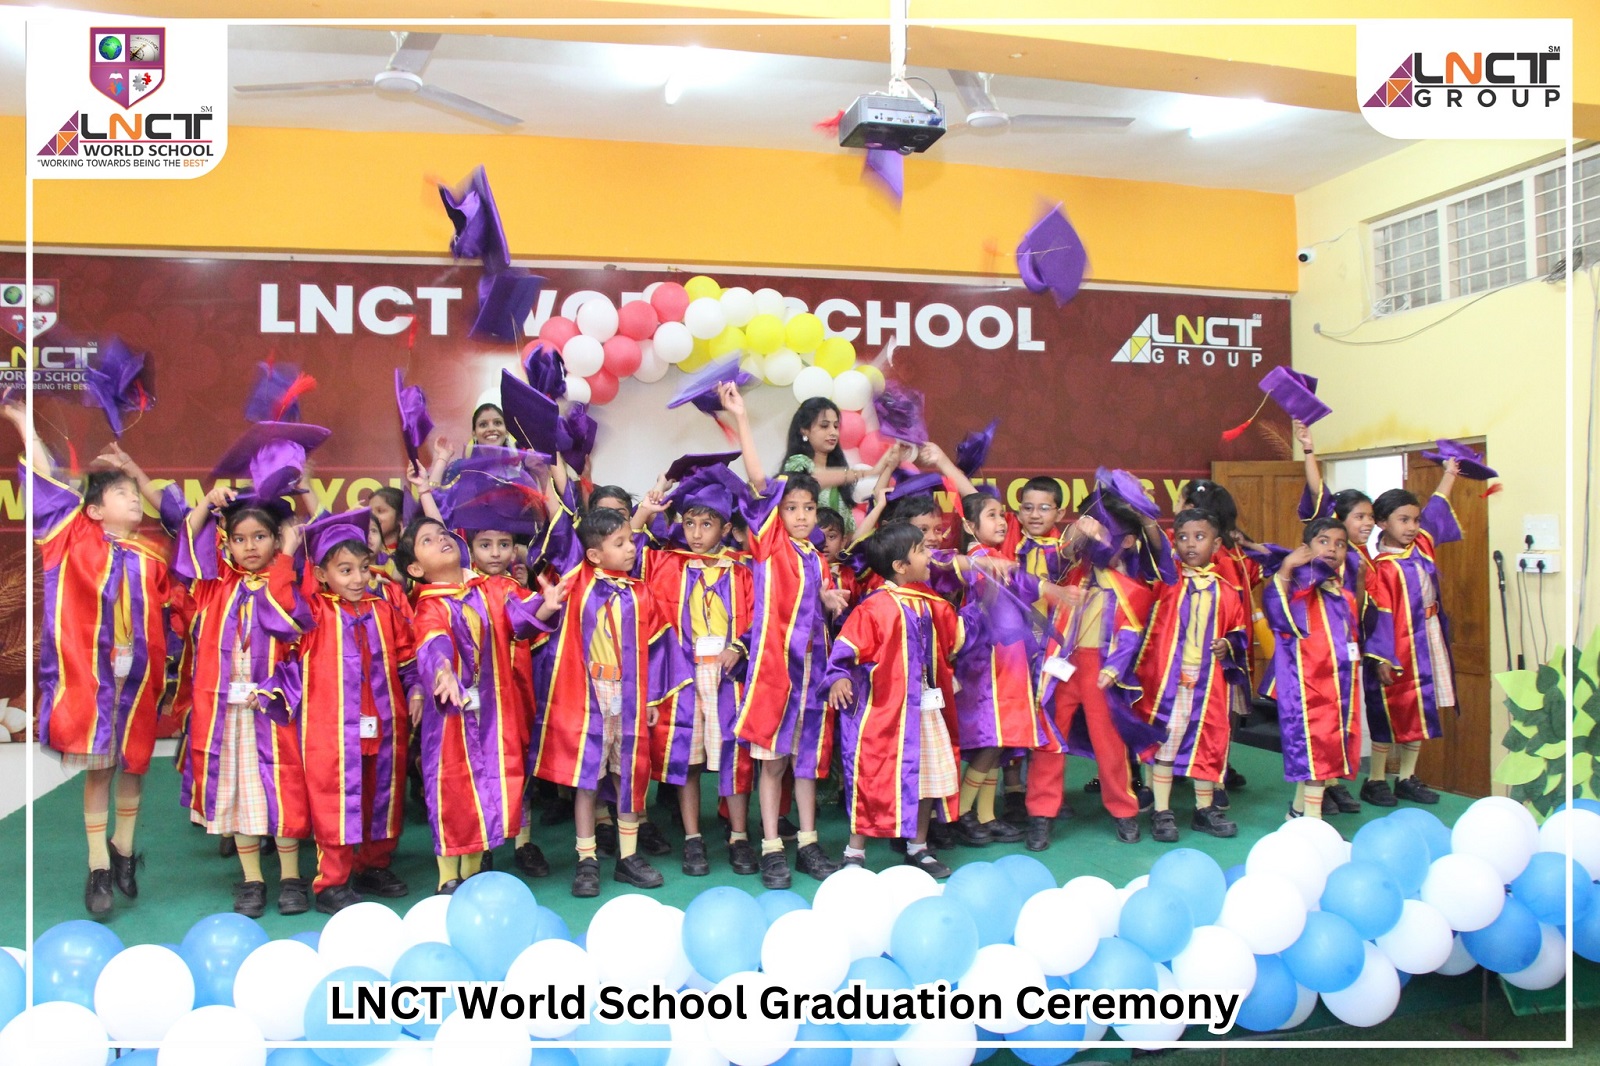 celebrate the graduation ceremony at LNCT World School in Bhopal